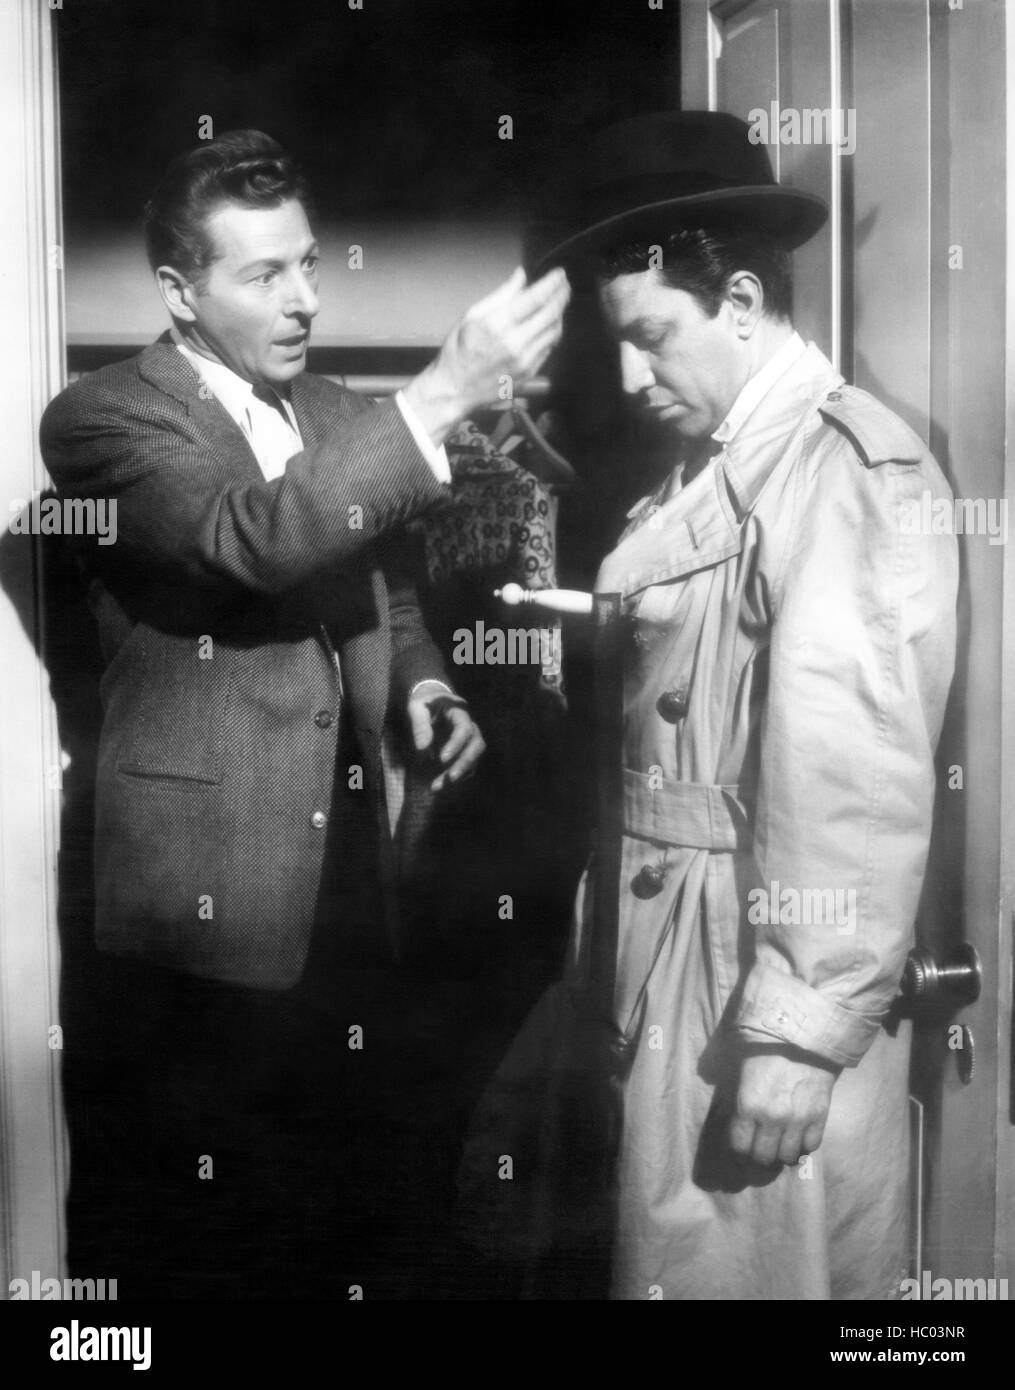 KNOCK ON WOOD, from left: Danny Kaye, Carl Milletaire, 1954 Stock Photo ...